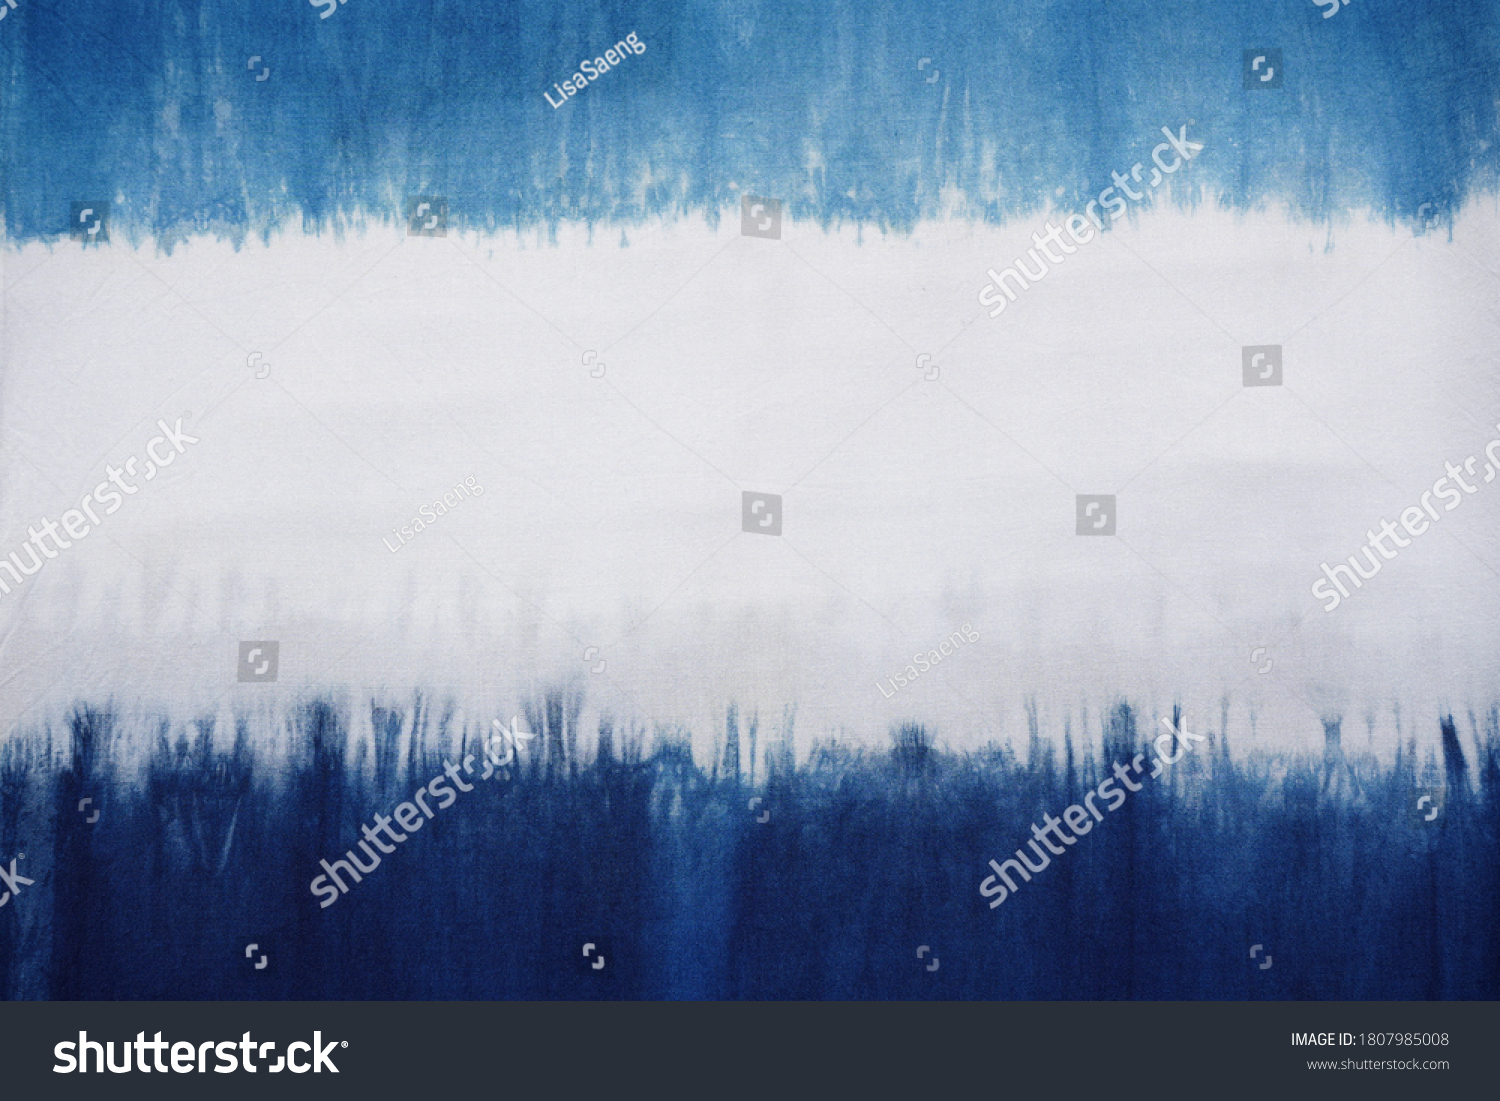 A natural indigo dye on cotton fabric showing color flow and its pattern.  Horizontal blue and white. At center is good for texts, copy space and advertisement. Material, object, background, design.   #1807985008